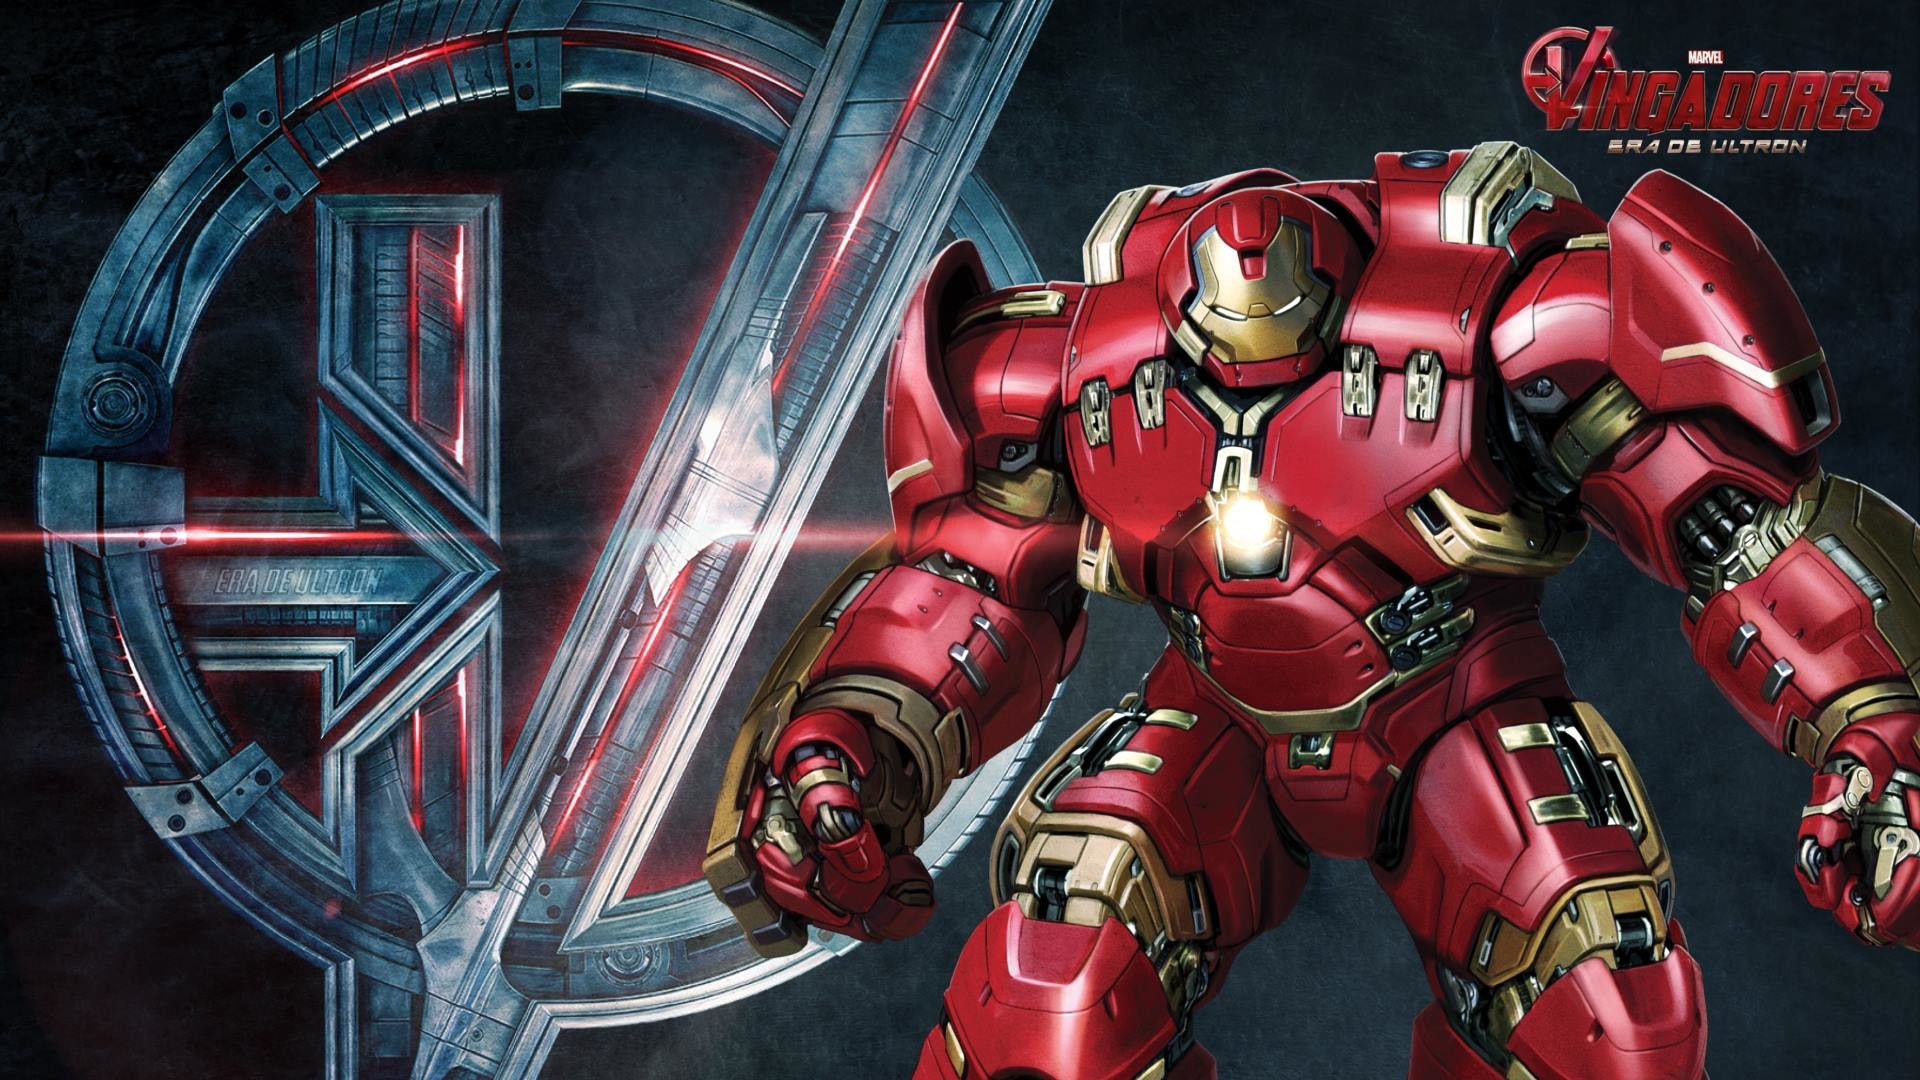 1920x1080 Of AVENGERS: AGE OF ULTRON Get Stylish Promo Art Character Wallpapers .